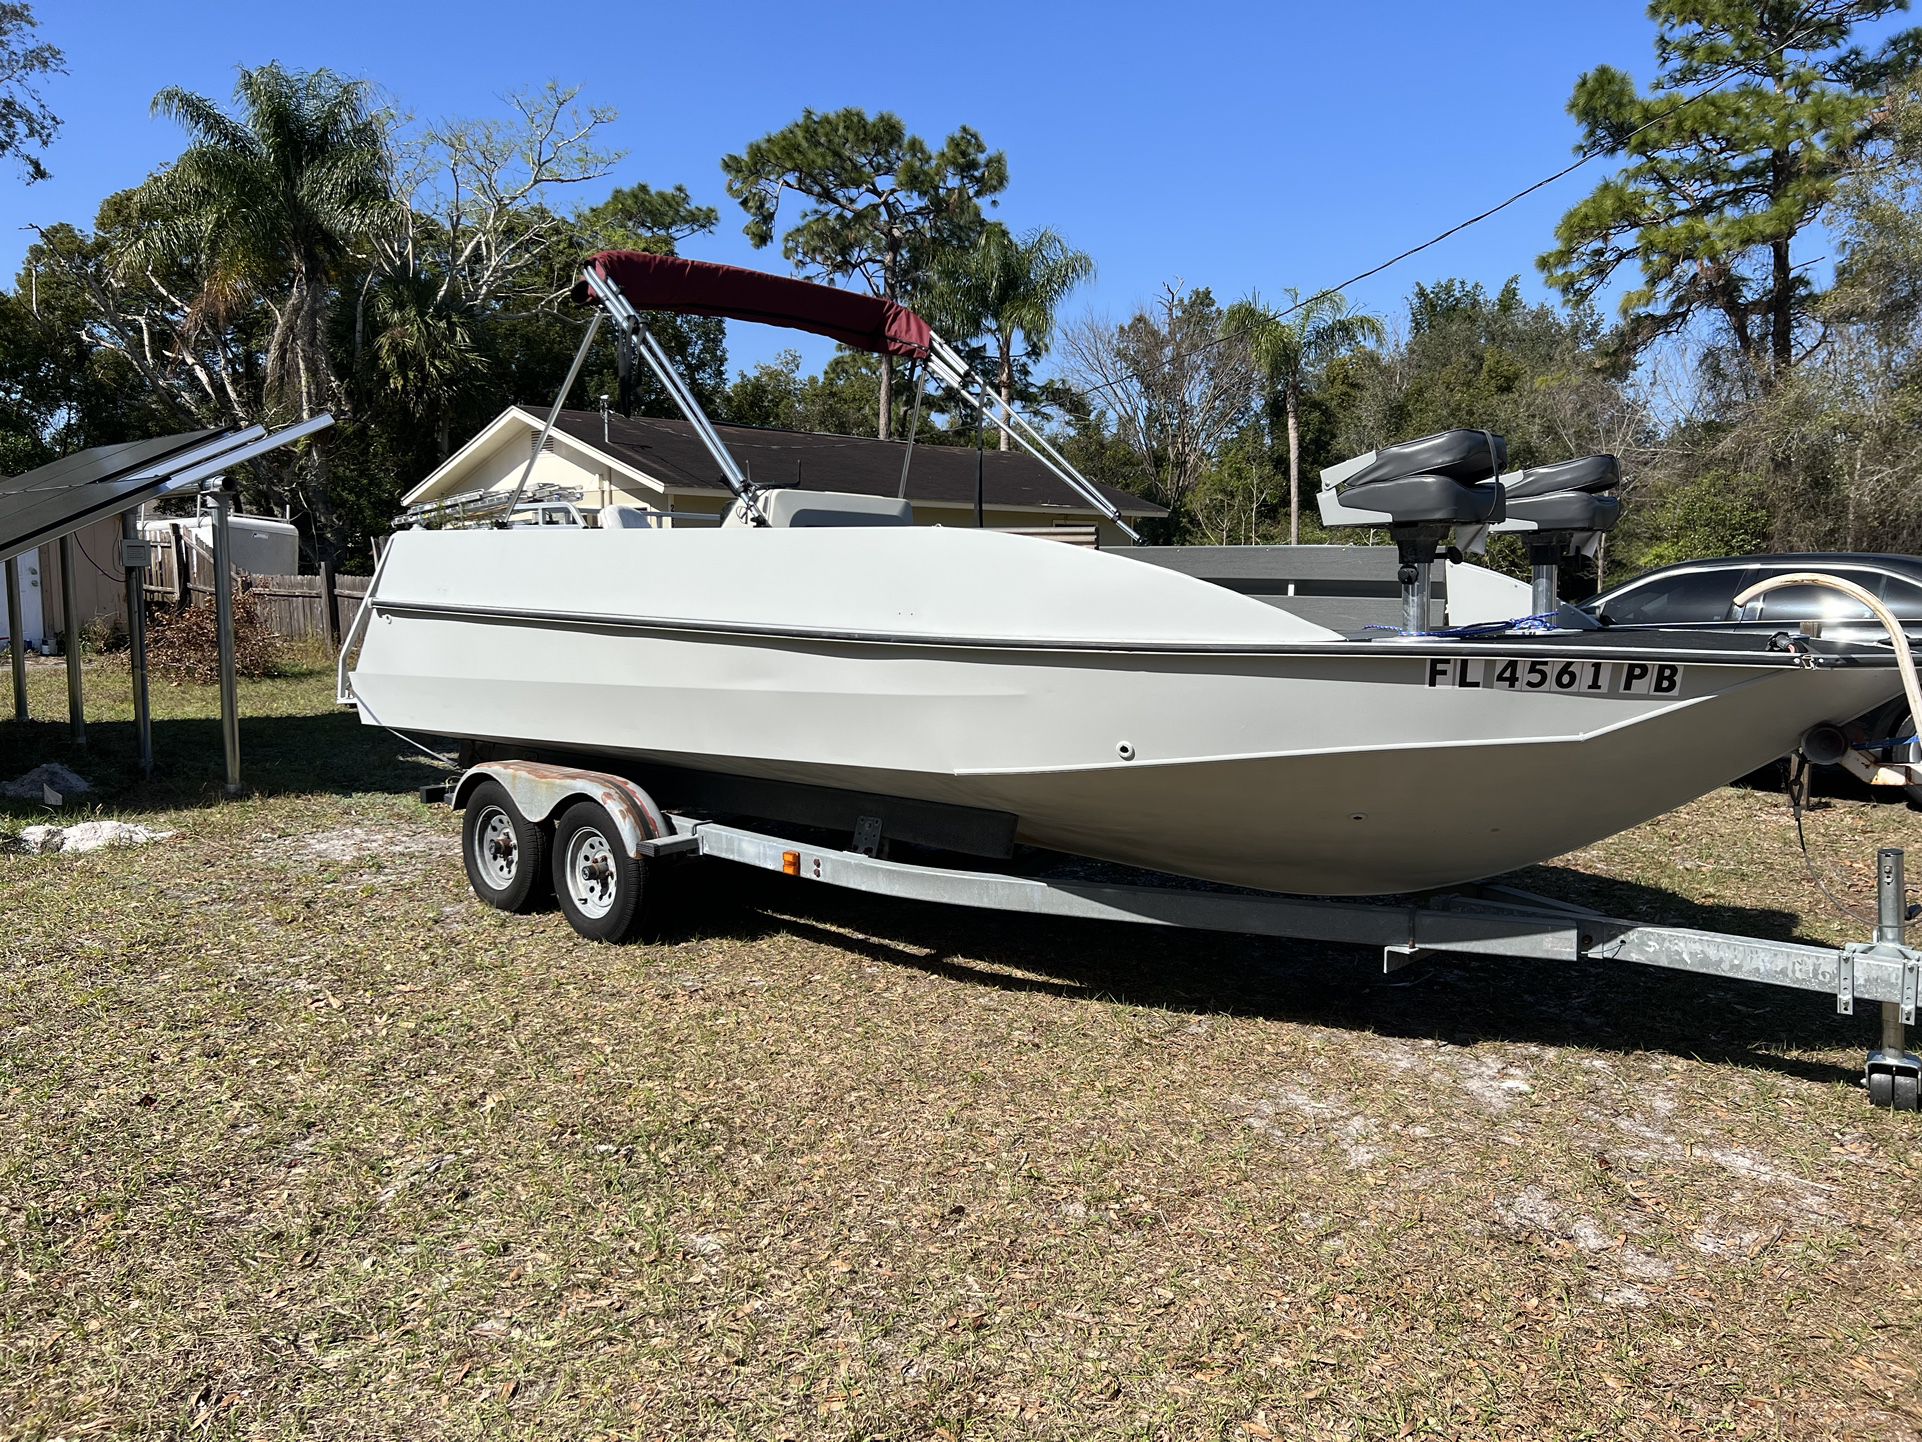 21 Foot tracker fishing and party boat